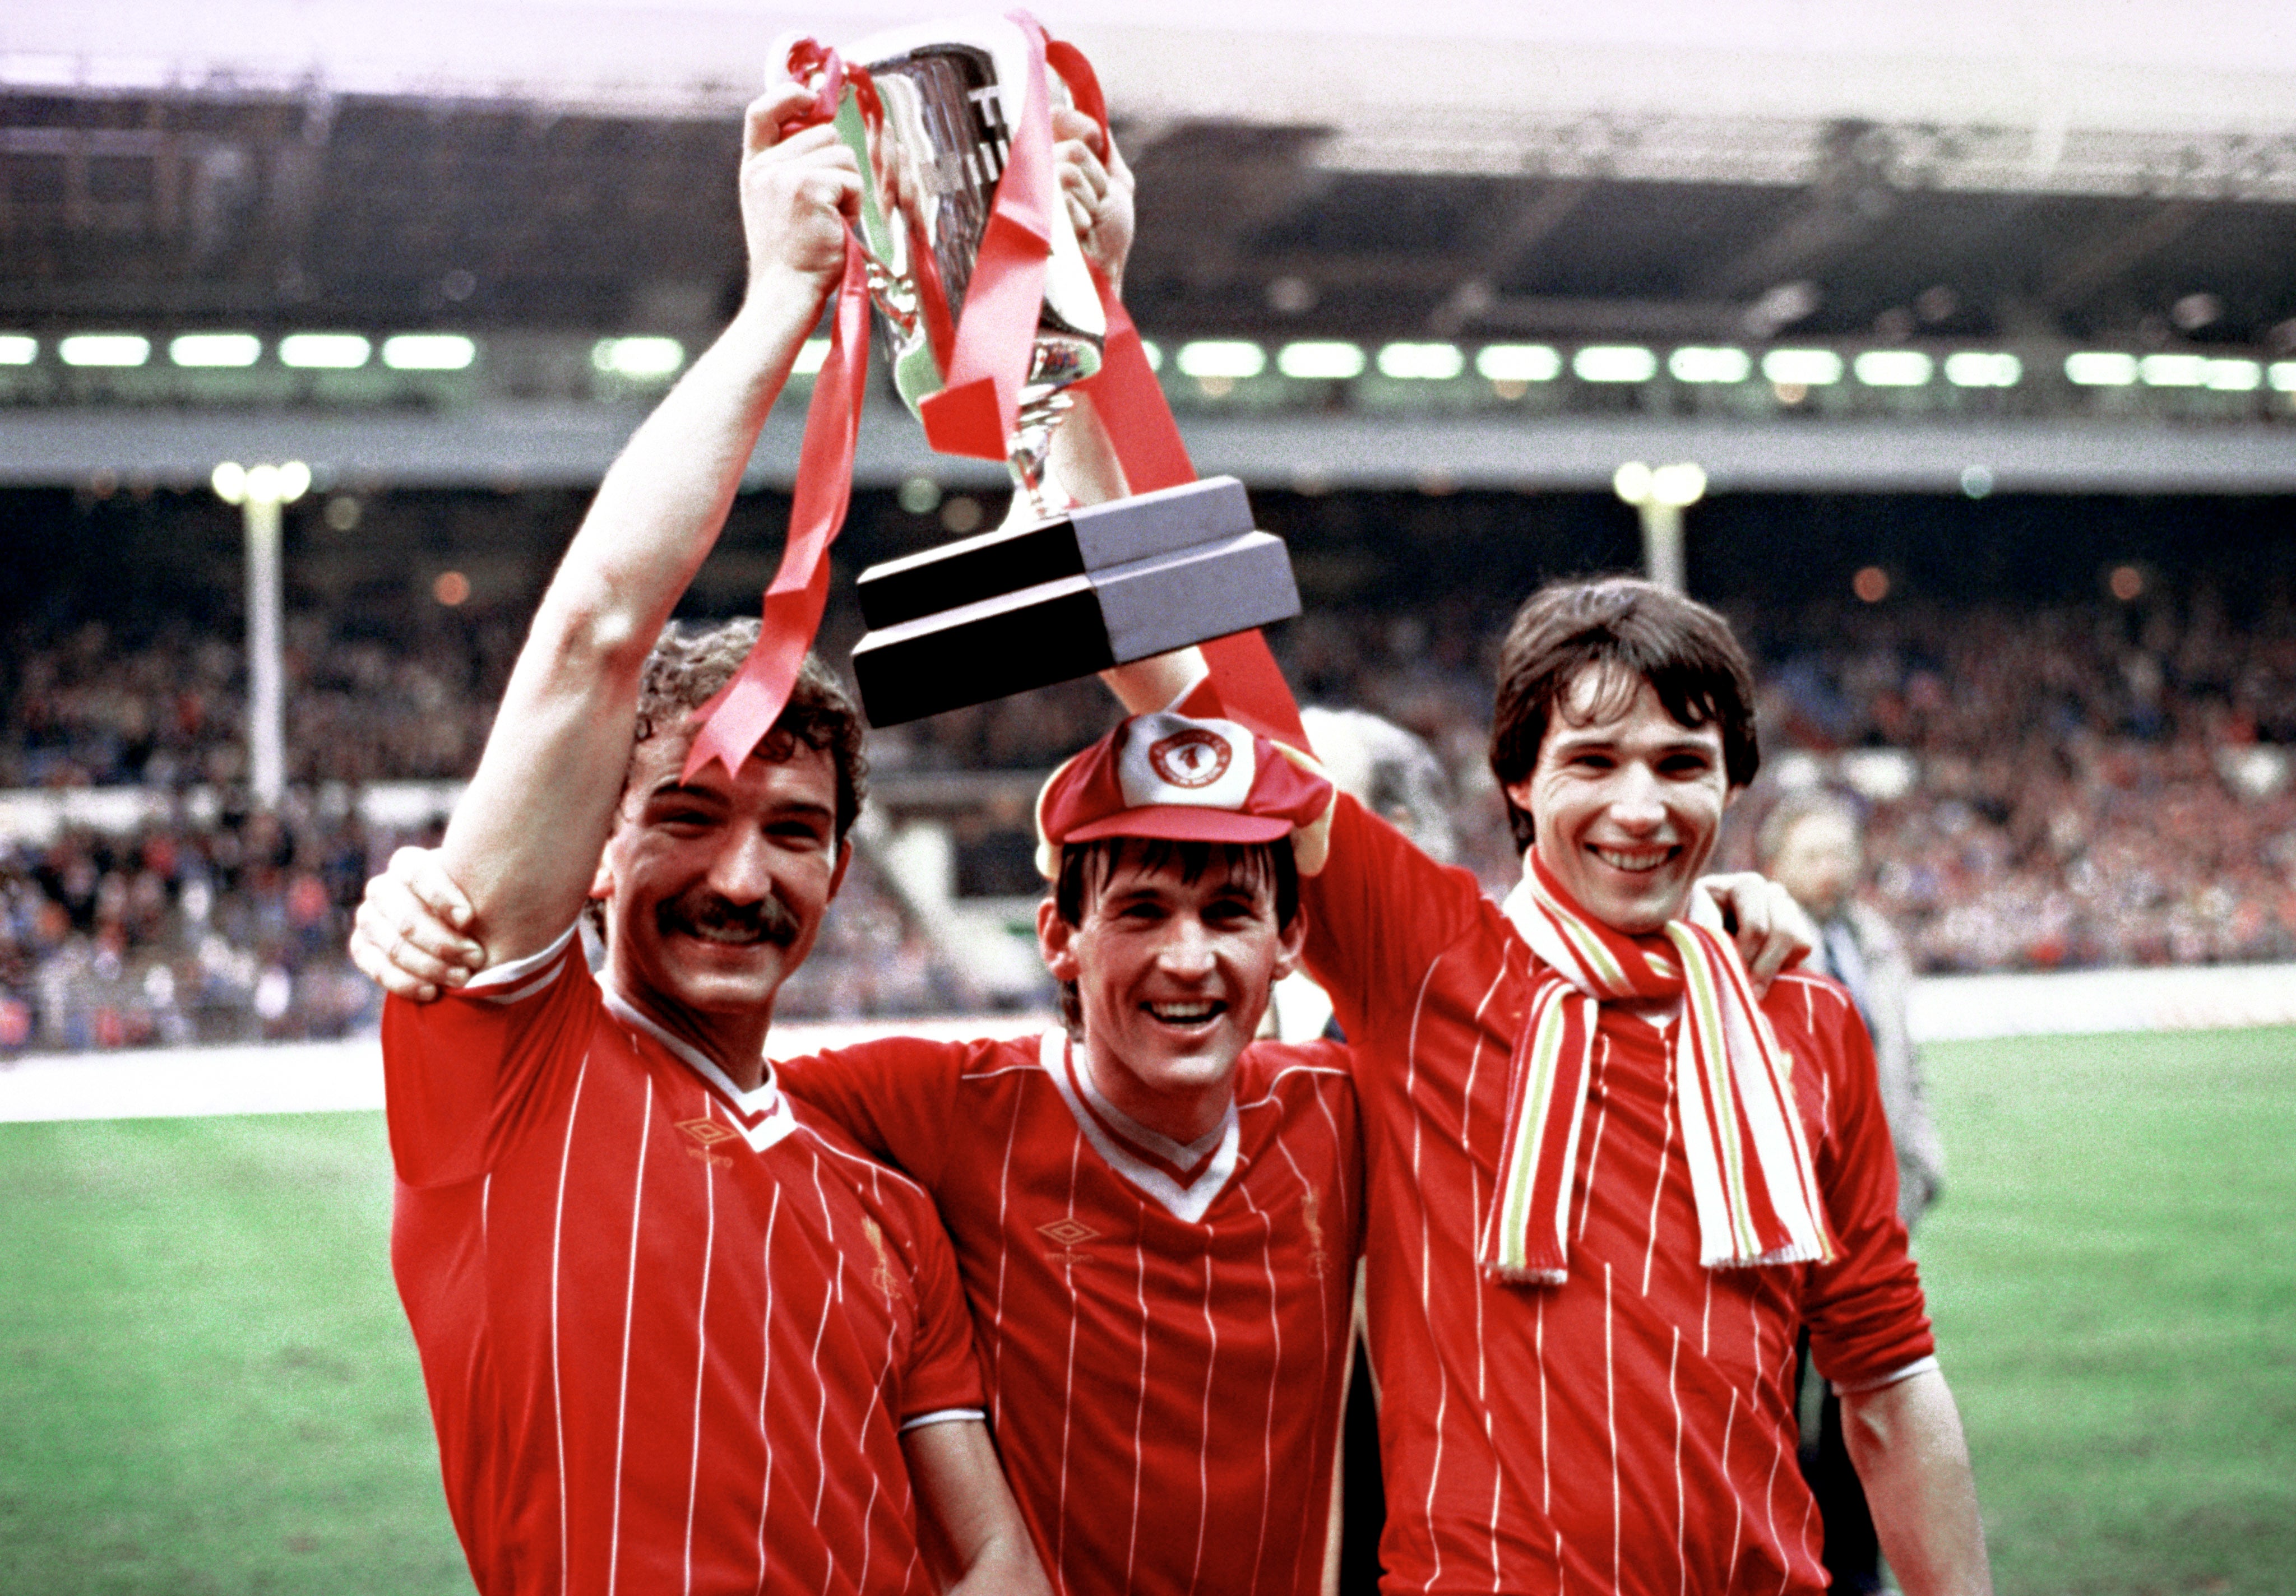 Graeme Souness (left) and Alan Hansen (right) were team mates for club and country